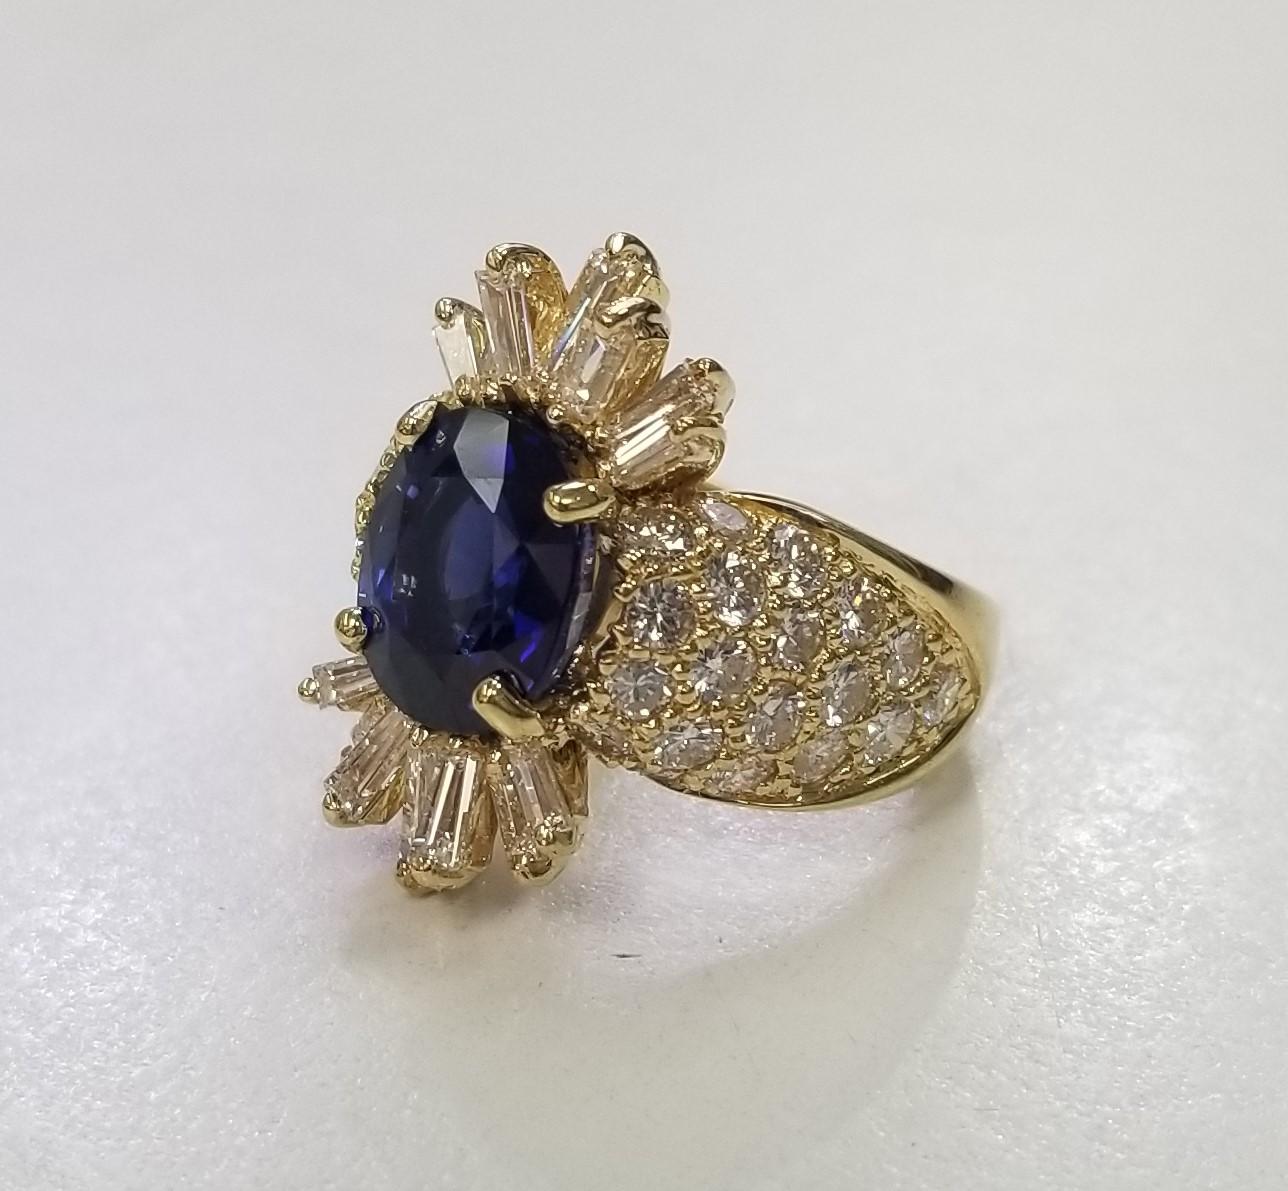 Specifications:
*Motivated to Sell - Please make a Fair Offer*
    main stone: GIA Certified Lab Sapphire Oval Cut 4.70cts.
    diamond: 14Tapper Baguette cut diamonds and 
                     rounds total weight 2.15ycts.       
    diamond: